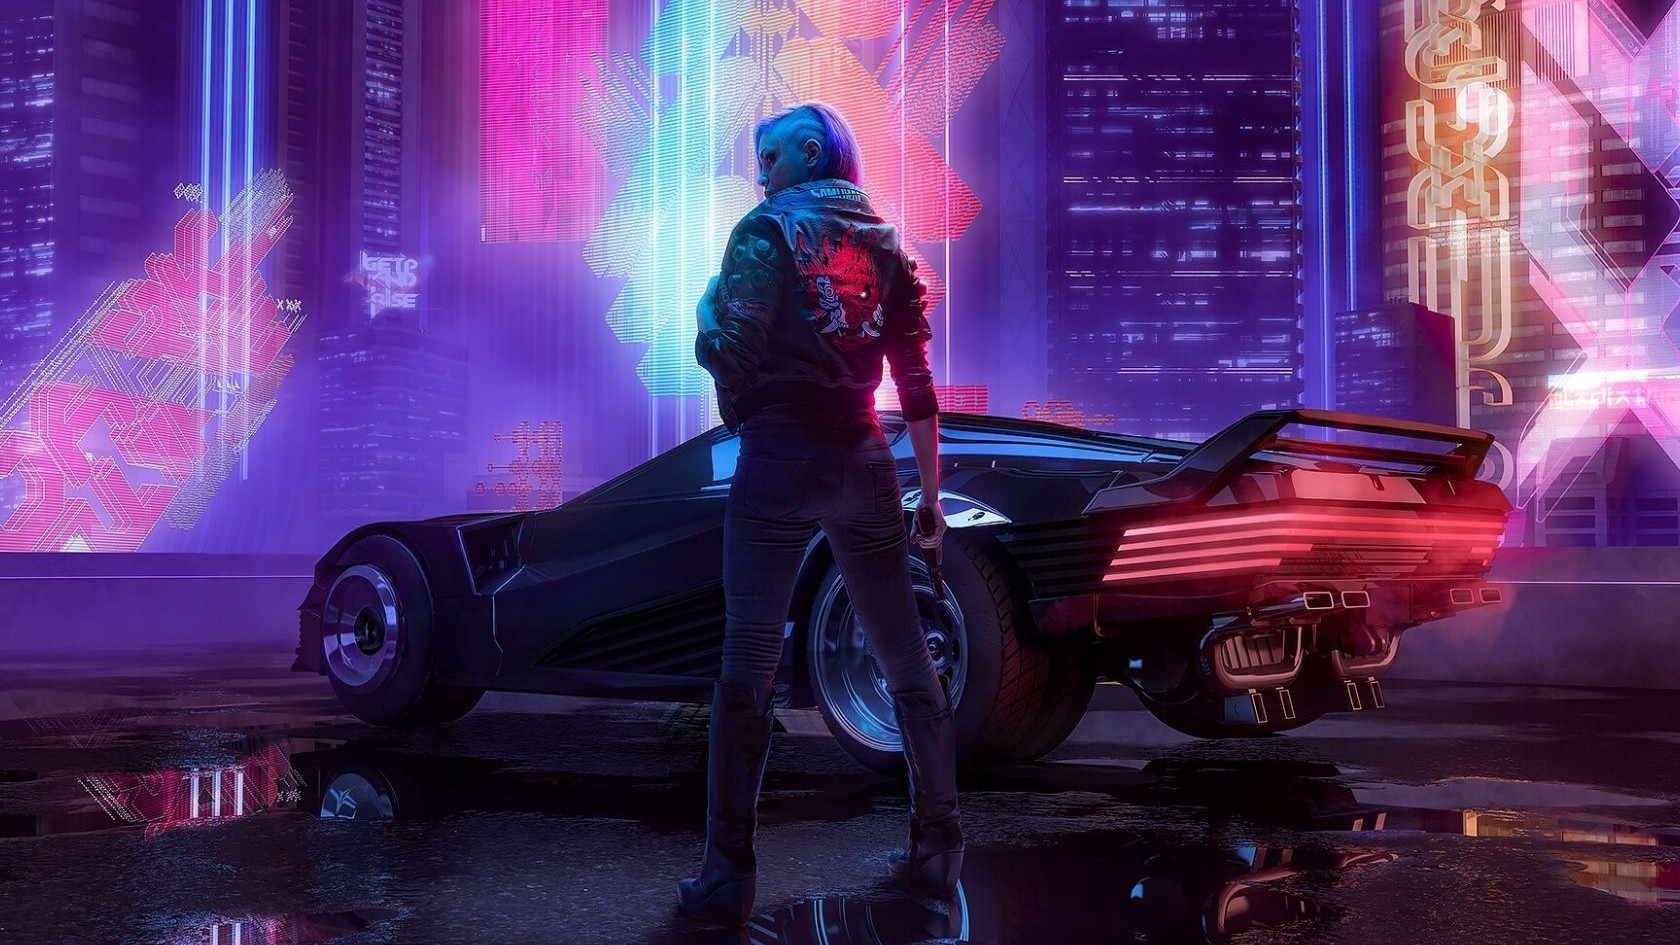 Cyberpunk 2077 player numbers skyrocketing after successful